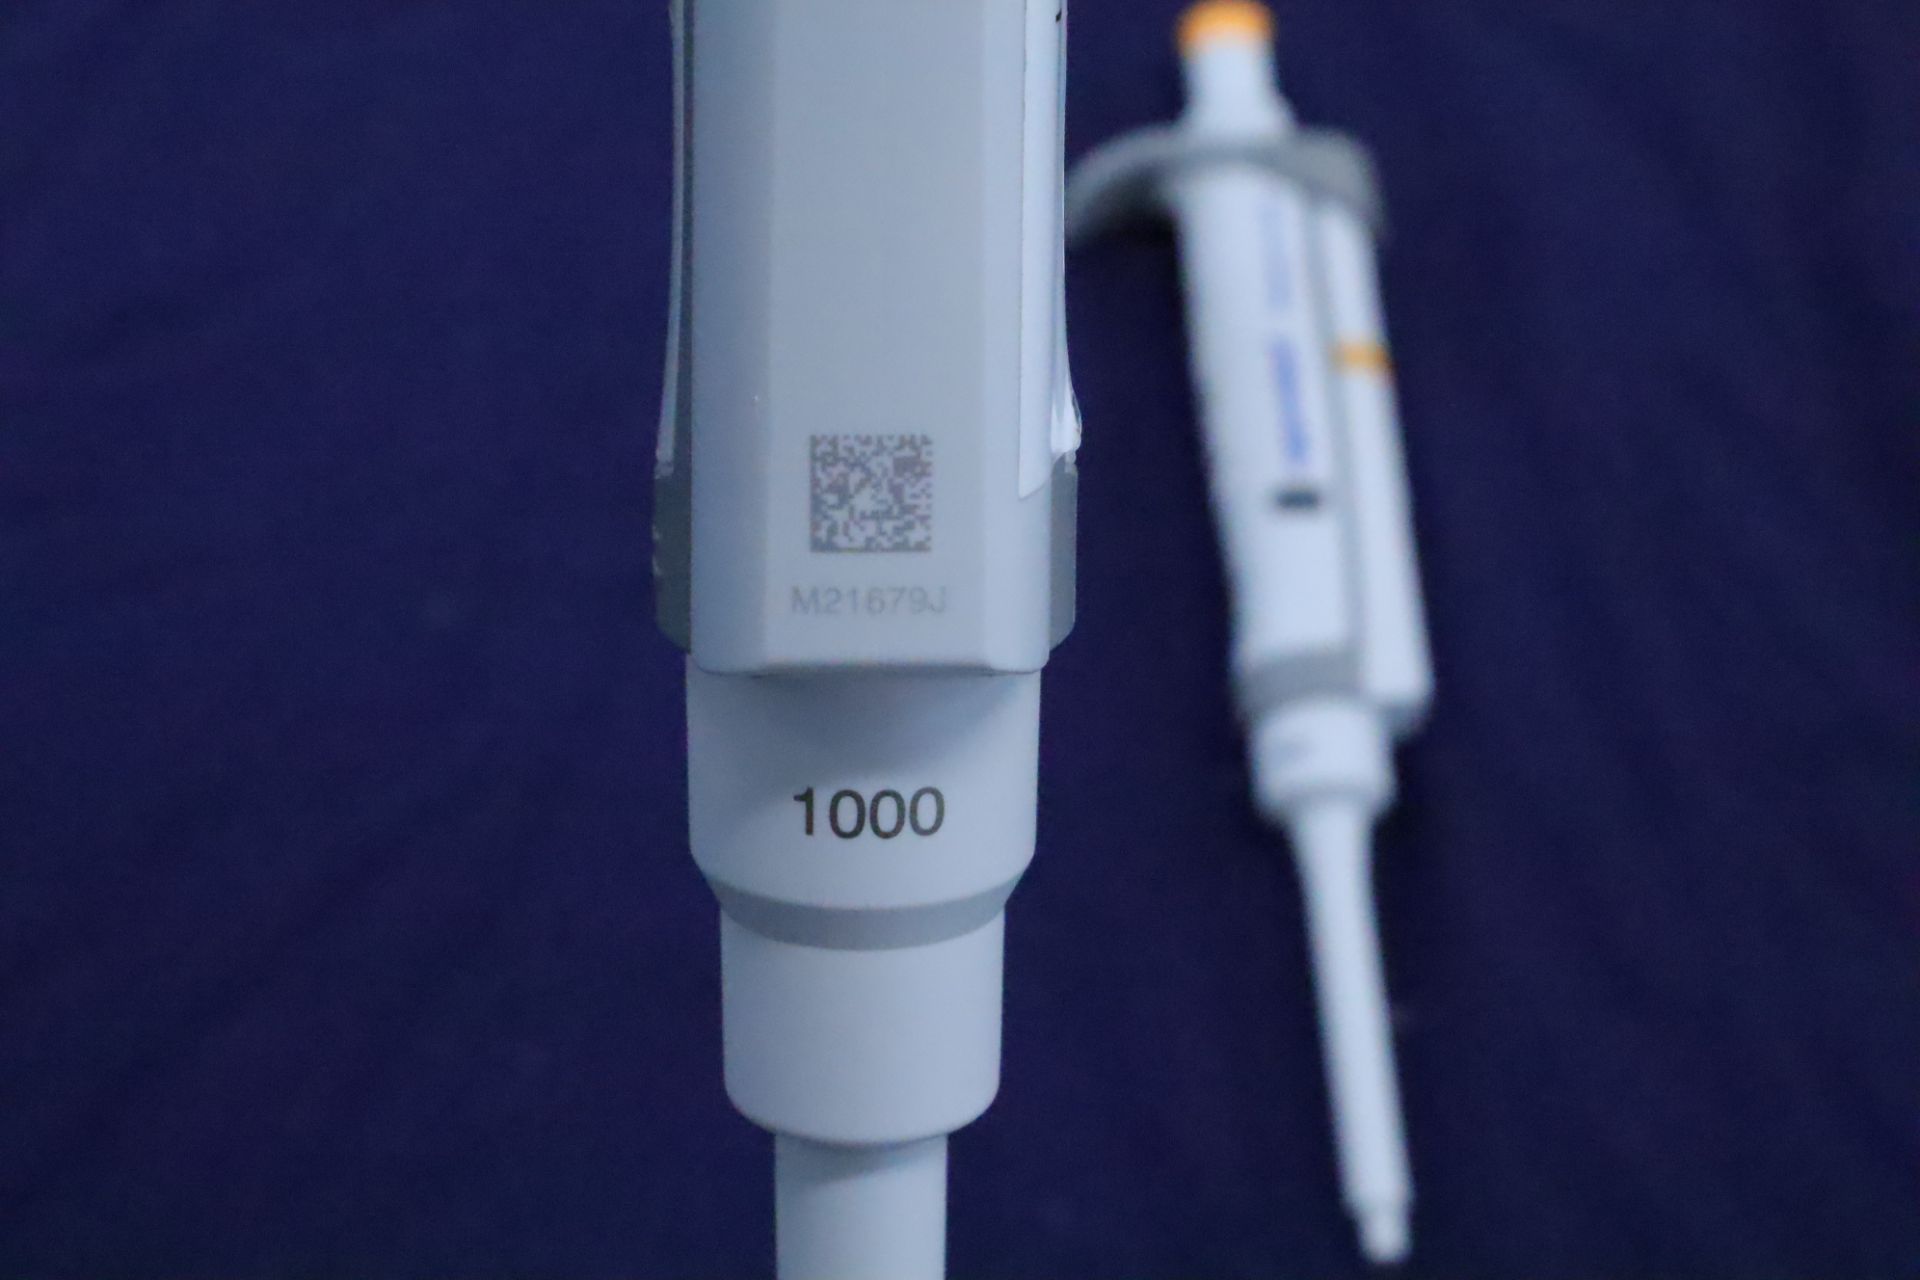 Eppendorf Research Plus Adjustable Volume Pipette (Qty 3) - Image 4 of 11